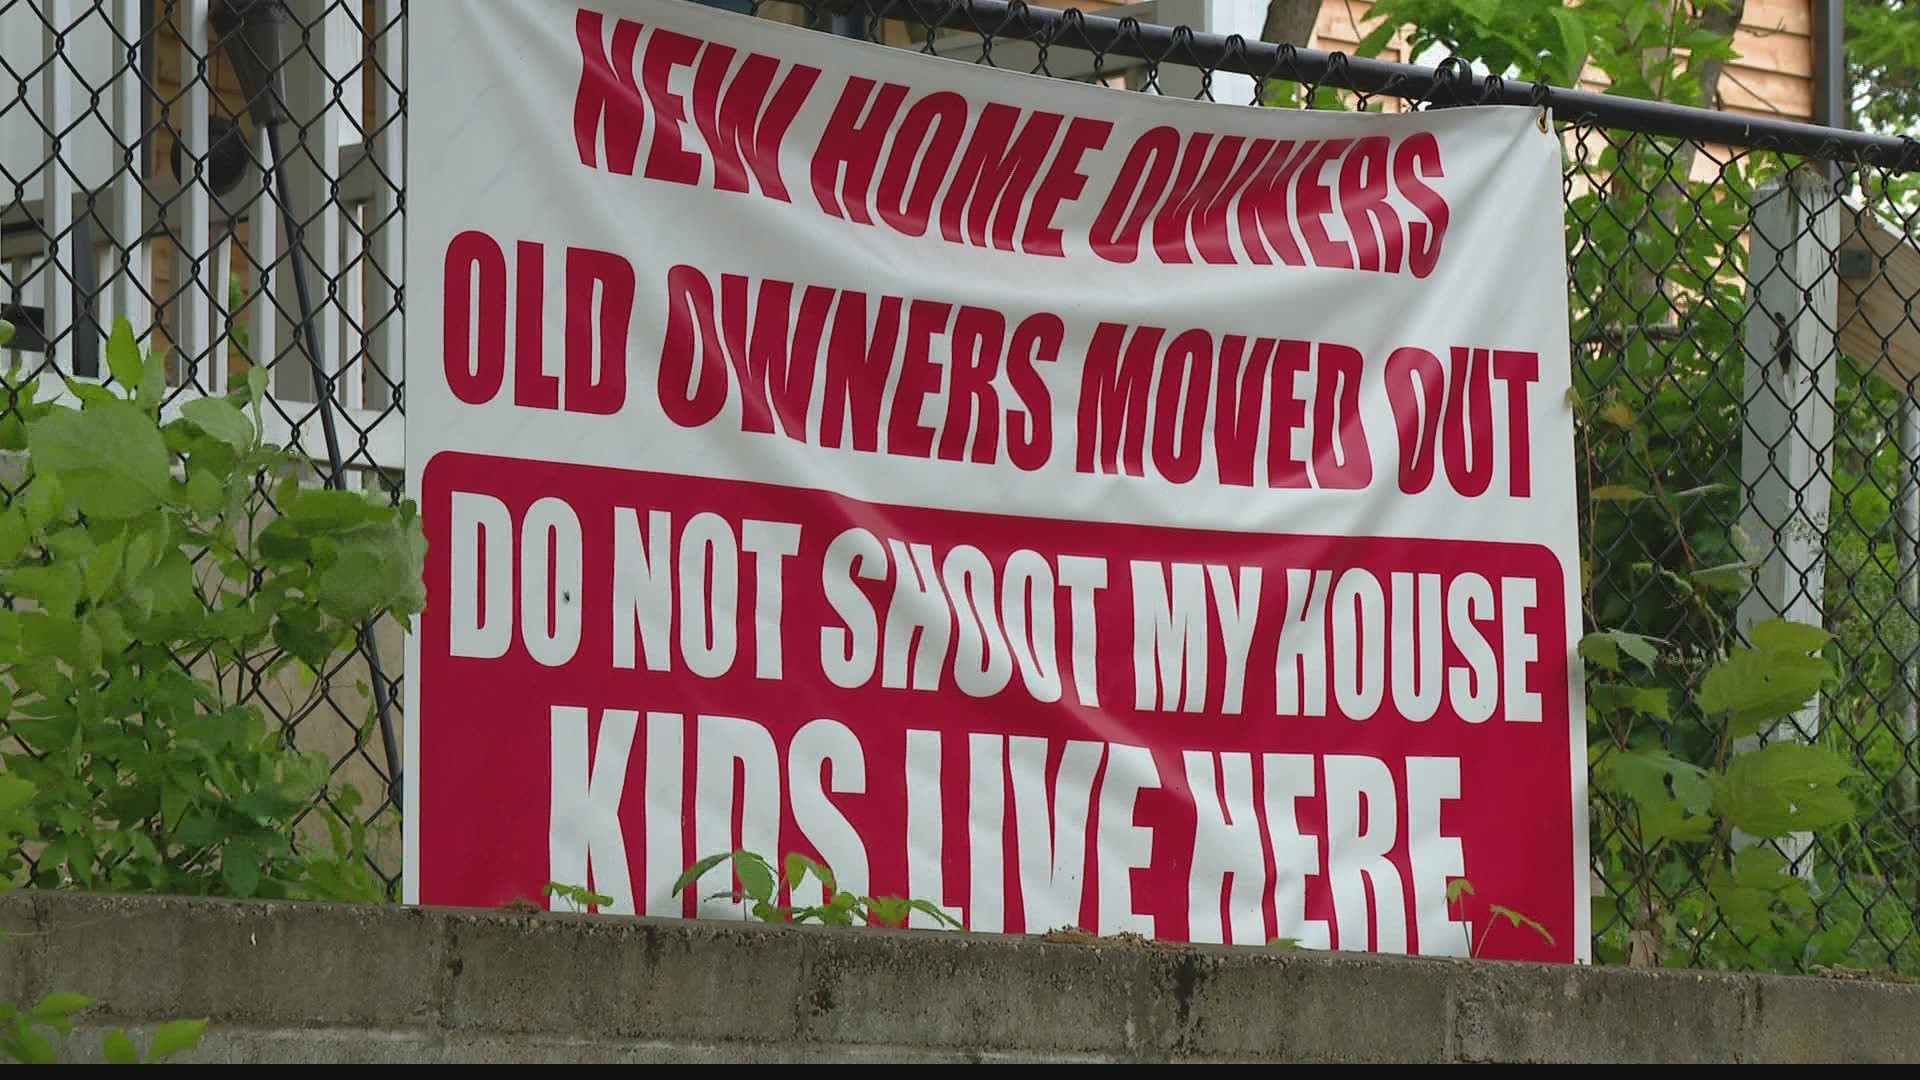 The message says it all: 'Do not shoot my house. Kids live here."